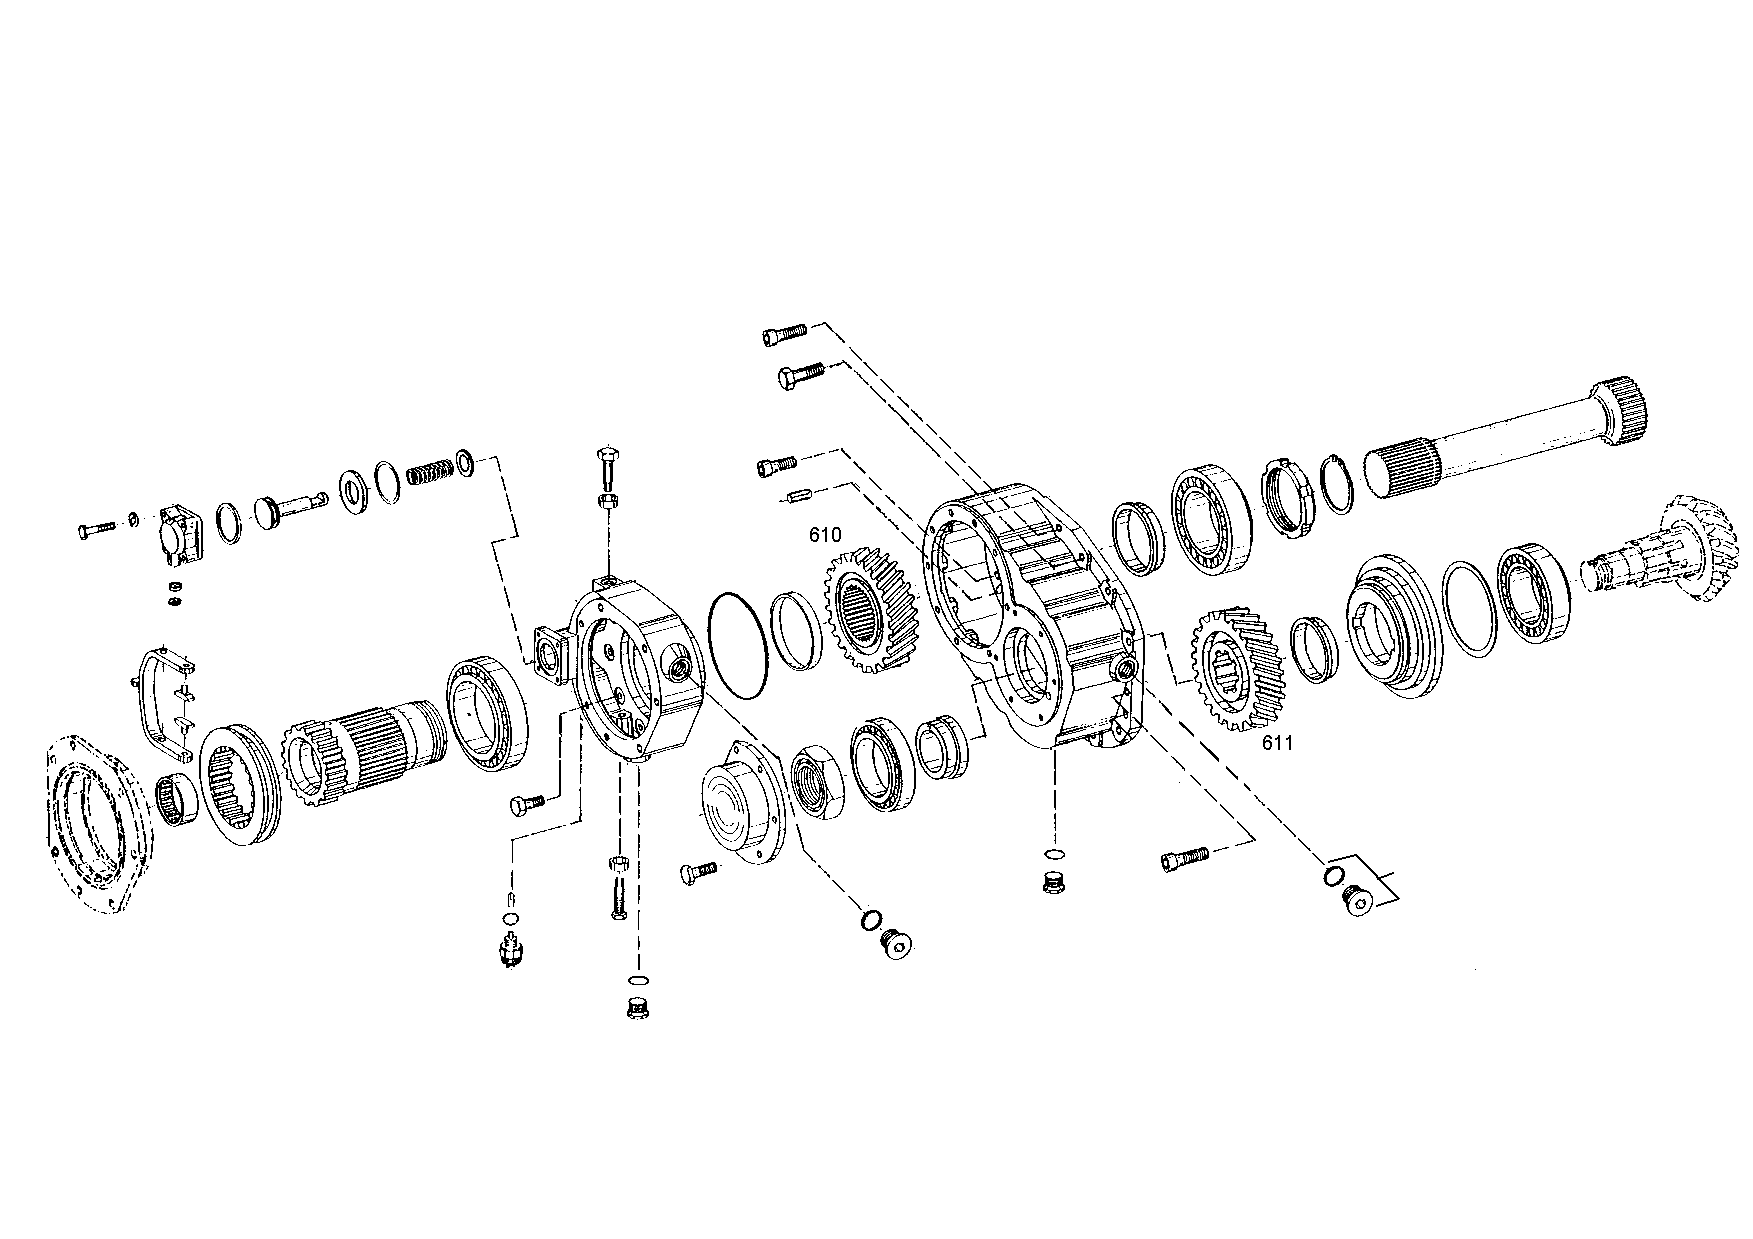 drawing for MOXY TRUCKS AS 352028 - LIMITATION DISC (figure 4)